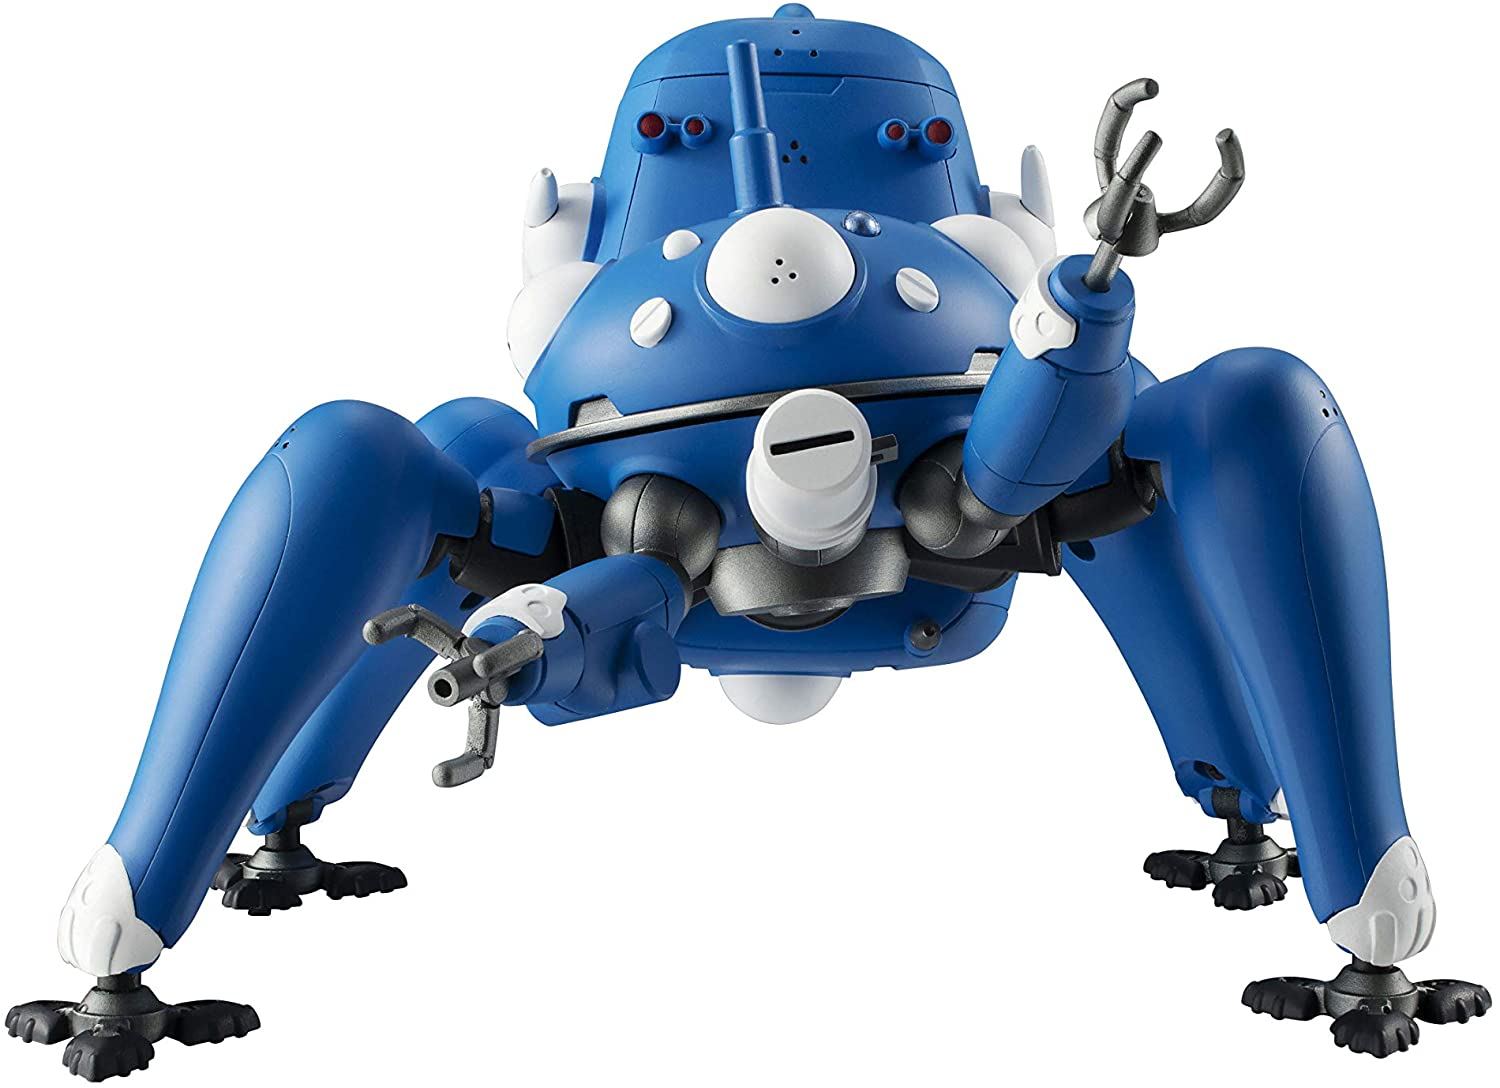 ROBOT SPIRITS SIDE GHOST GHOST IN THE SHELL: TACHIKOMA -GHOST IN THE SHELL S.A.C 2ND GIG & SAC_2045- Tamashii (Bandai Toys)